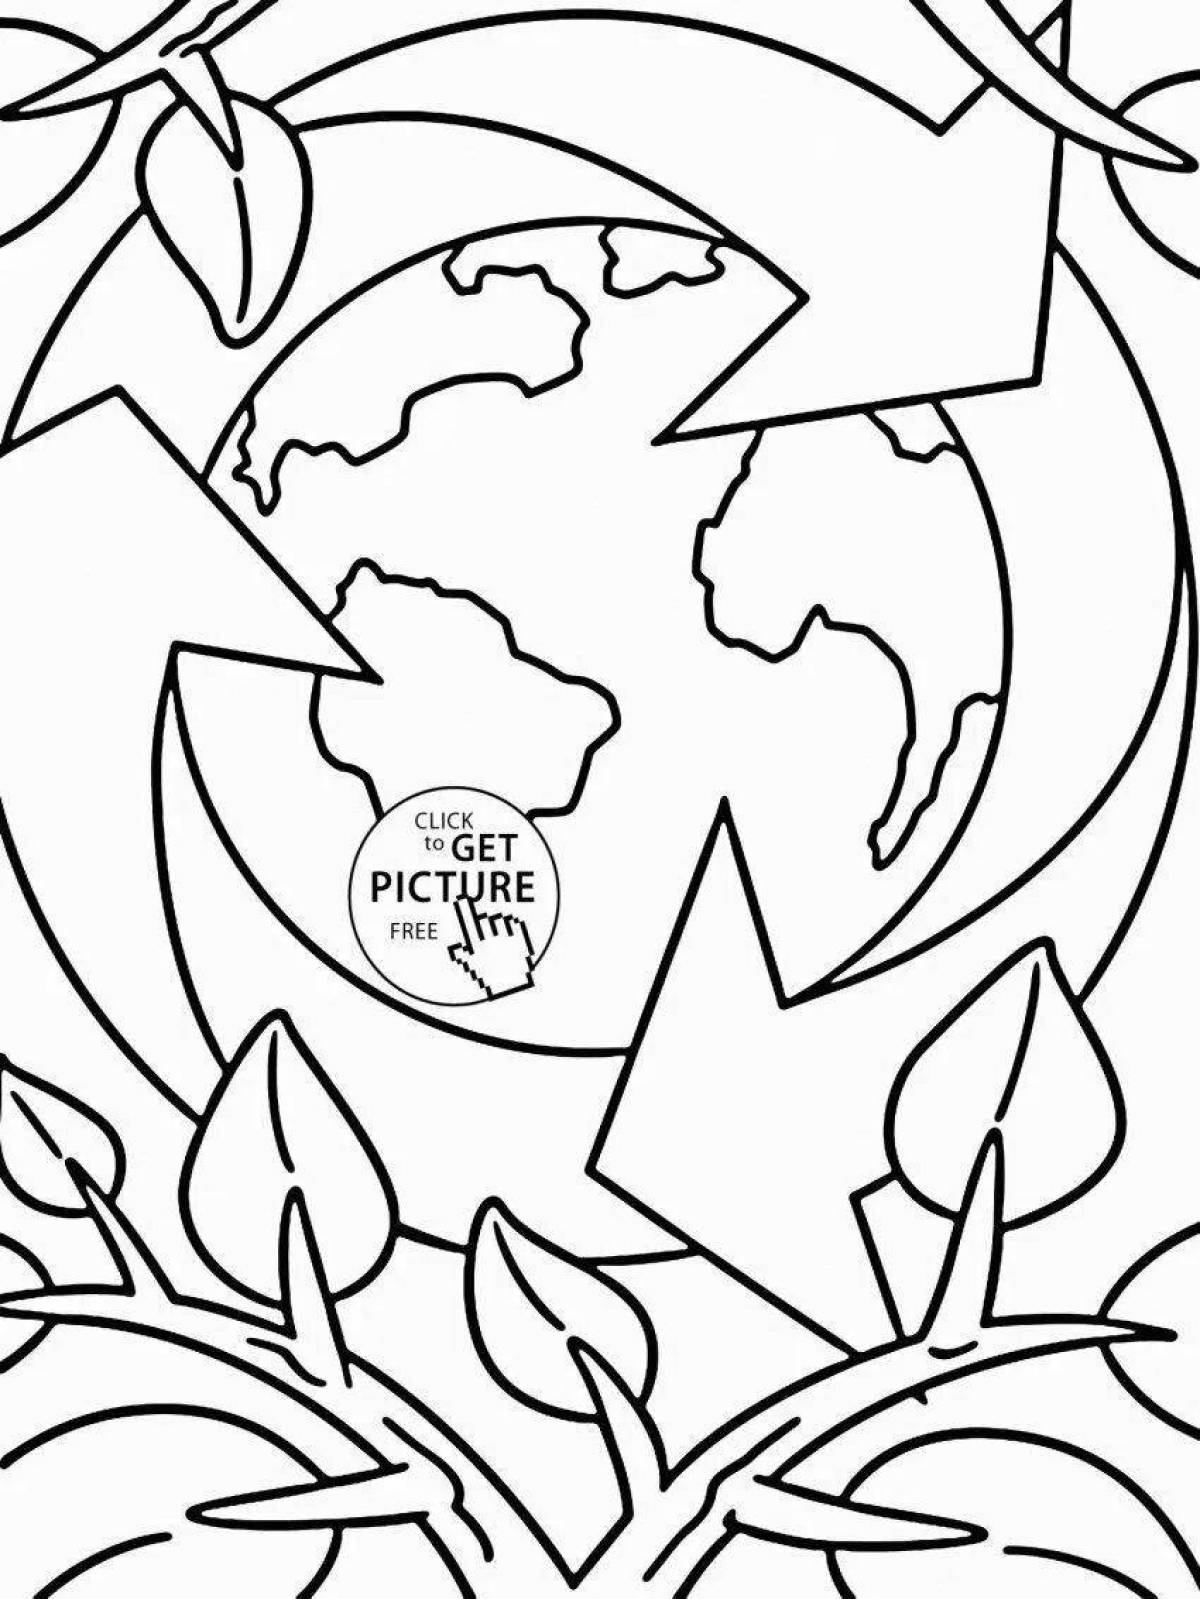 Colorful environmental care coloring page